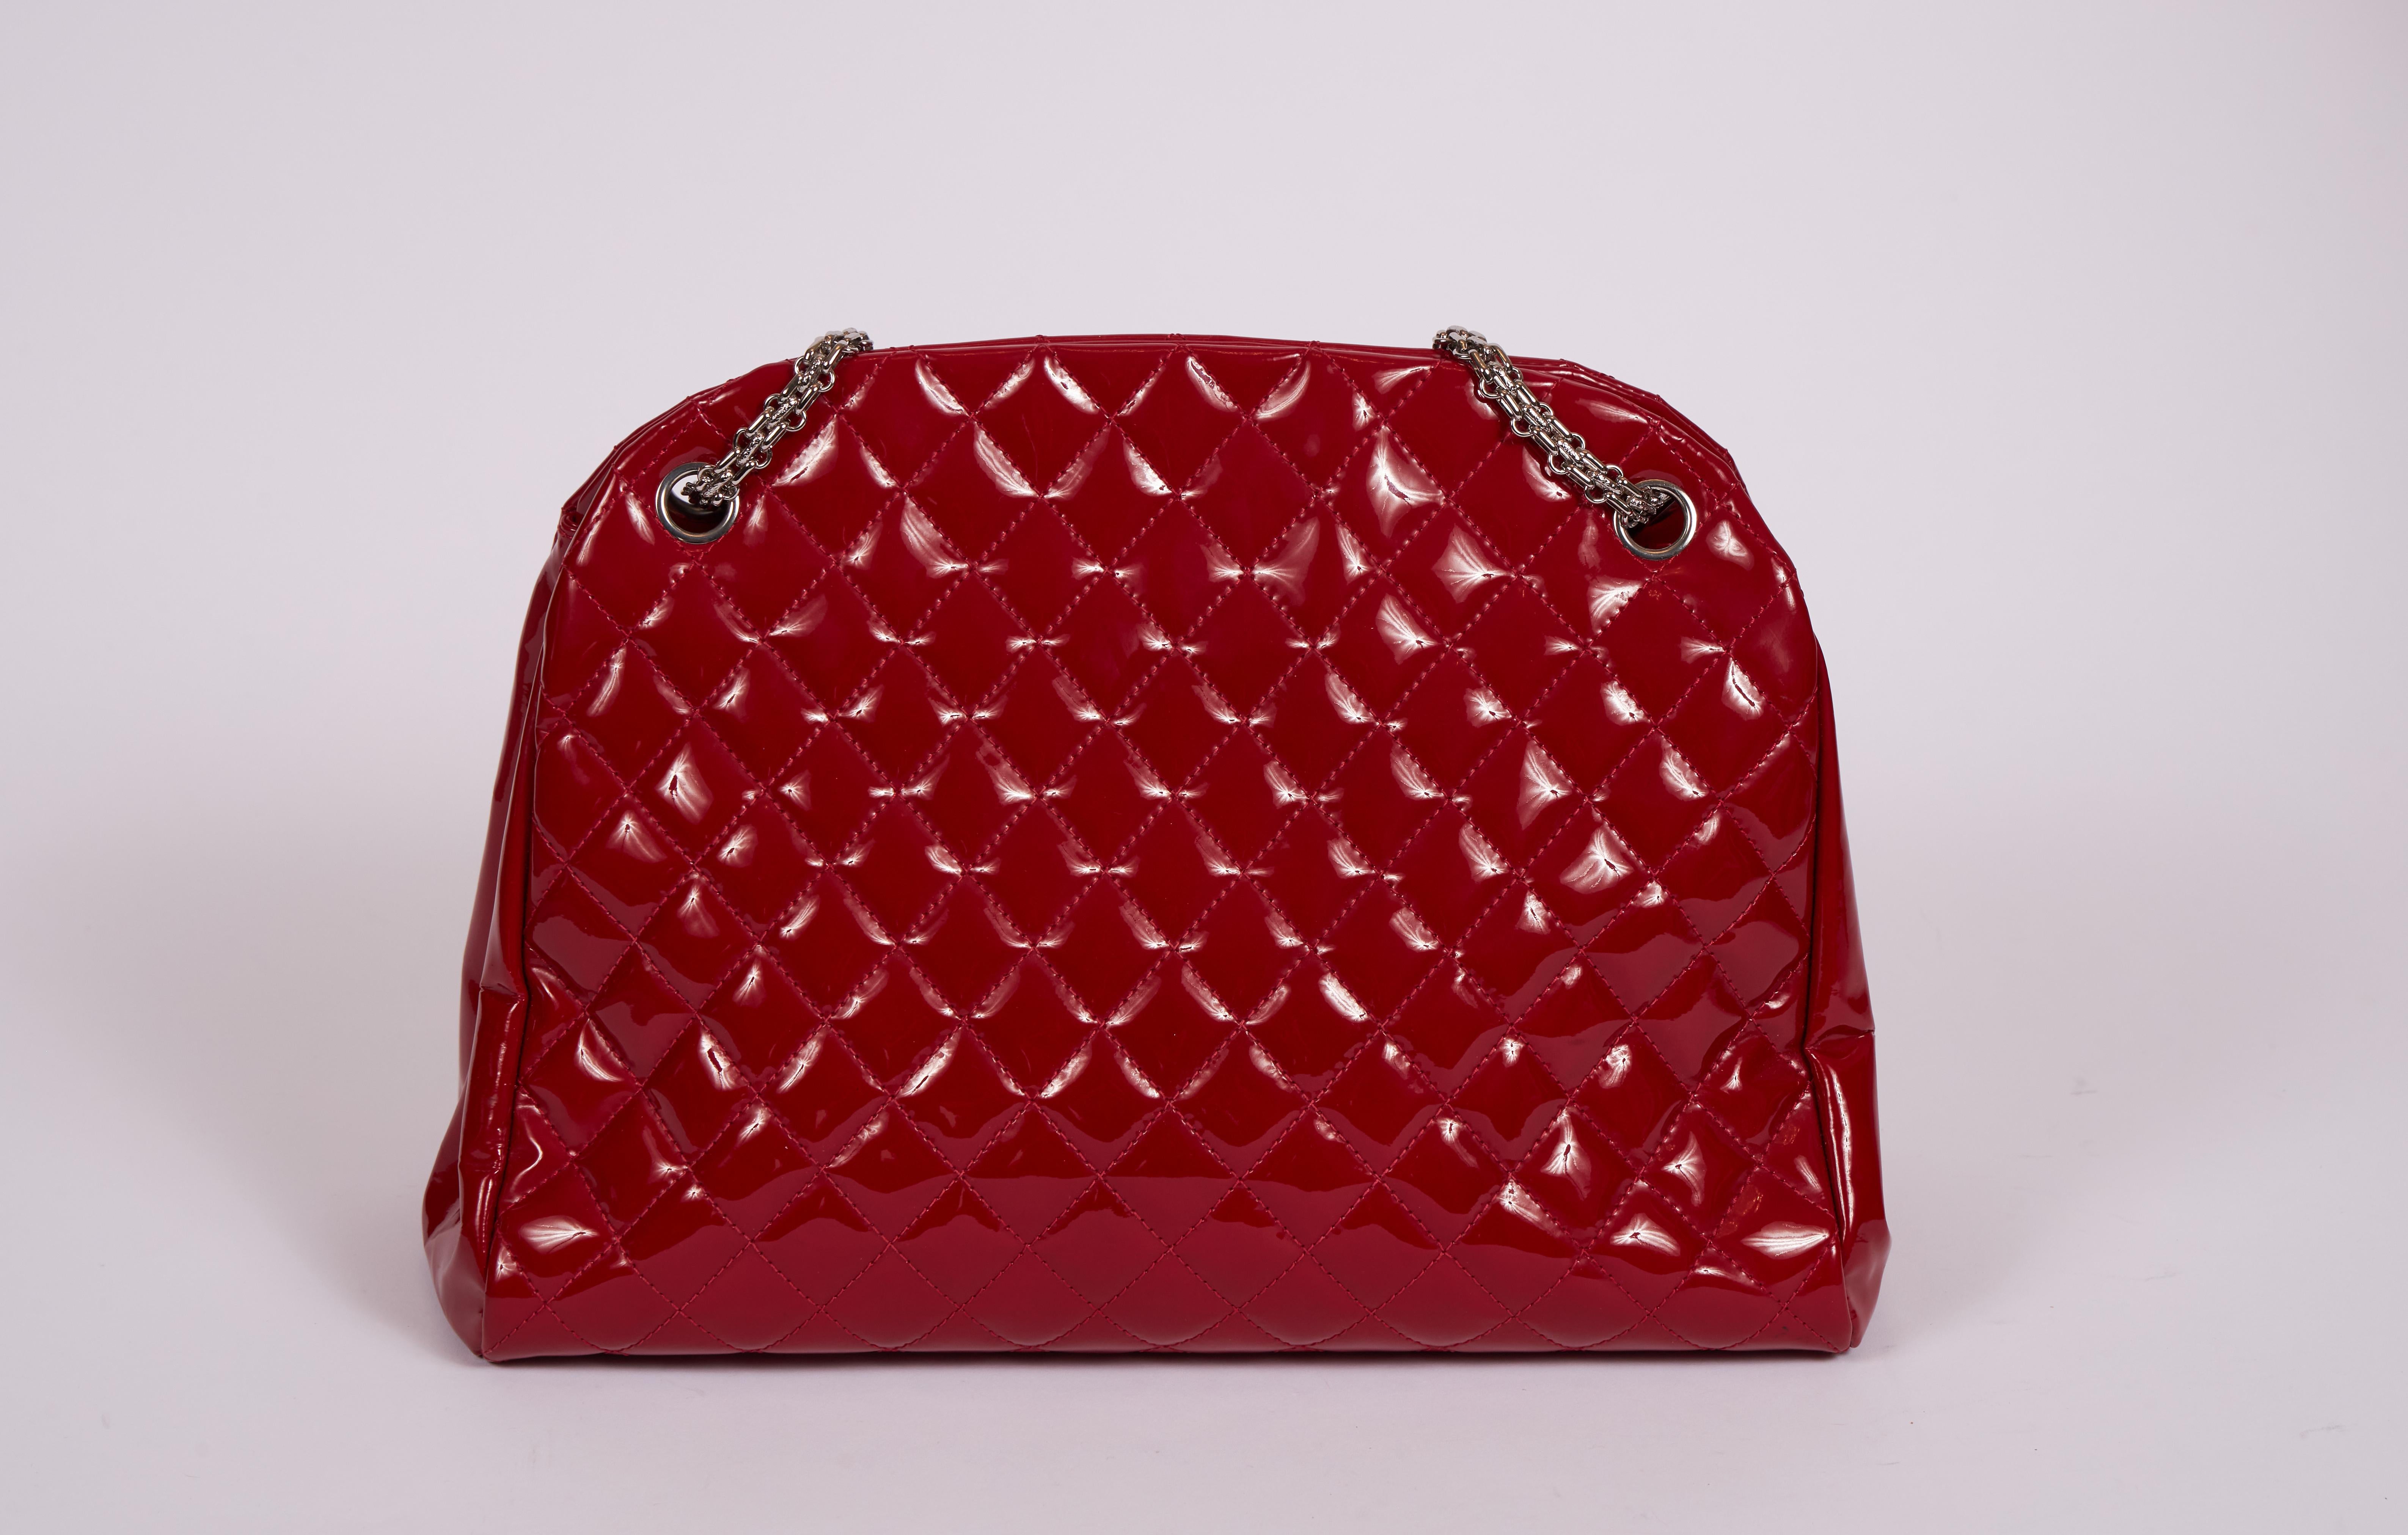 Chanel red patent quilted leather large mademoiselle bag. Ruthenium hardware. Shoulder drop 8